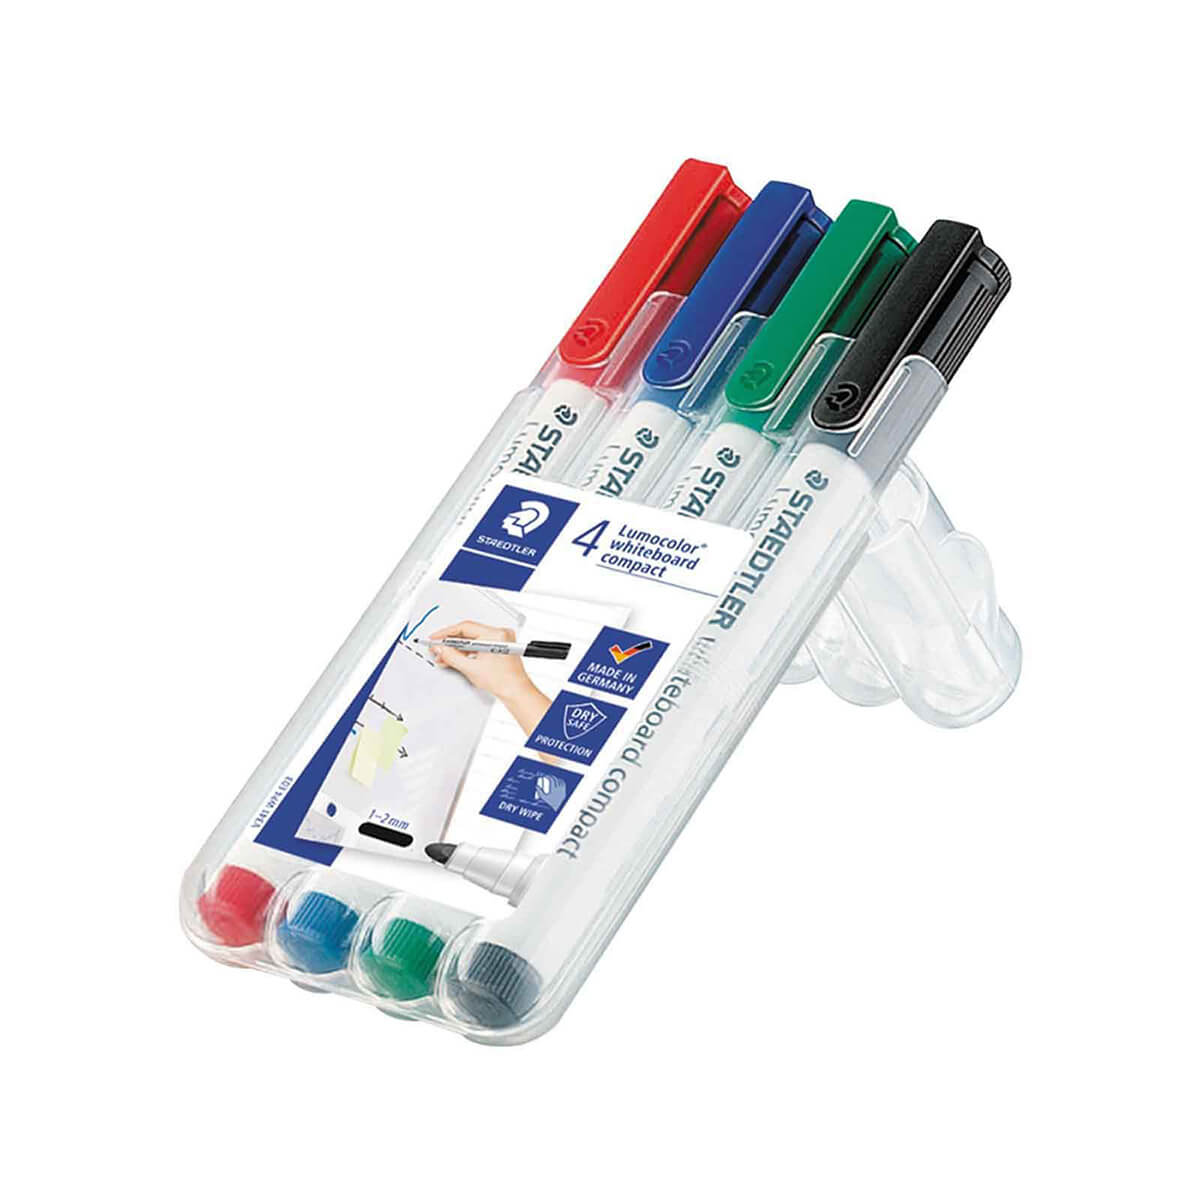 Staedtler Whiteboard marker lumocolor 341 wp4, 4 pieces Box compact